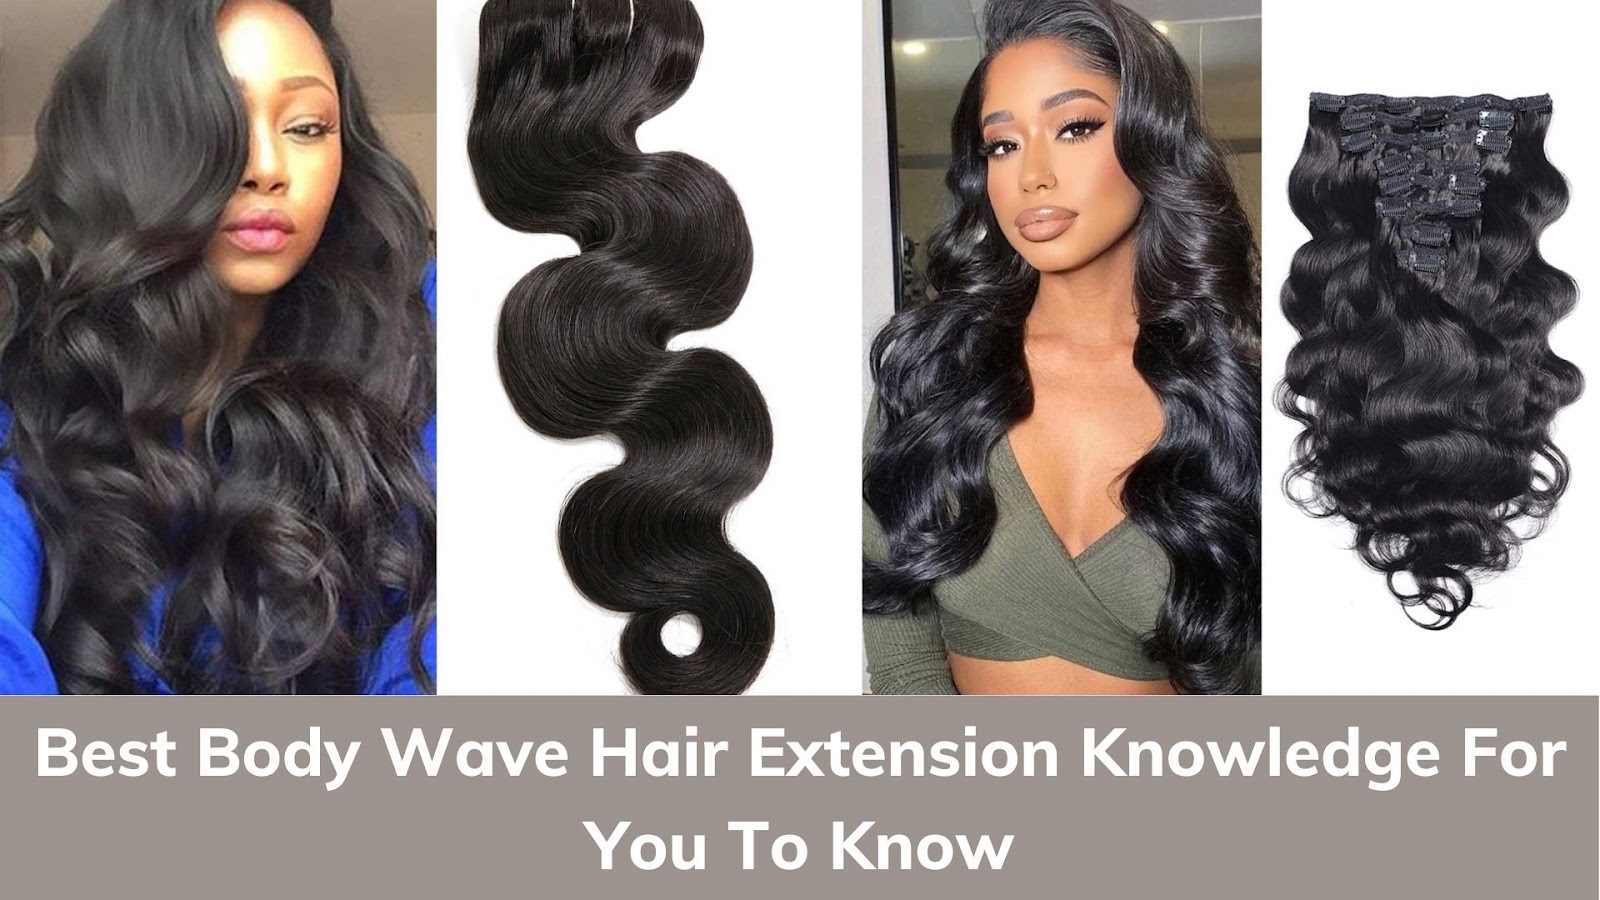 Best Body Wave Hair Extension Knowledge For You To Know